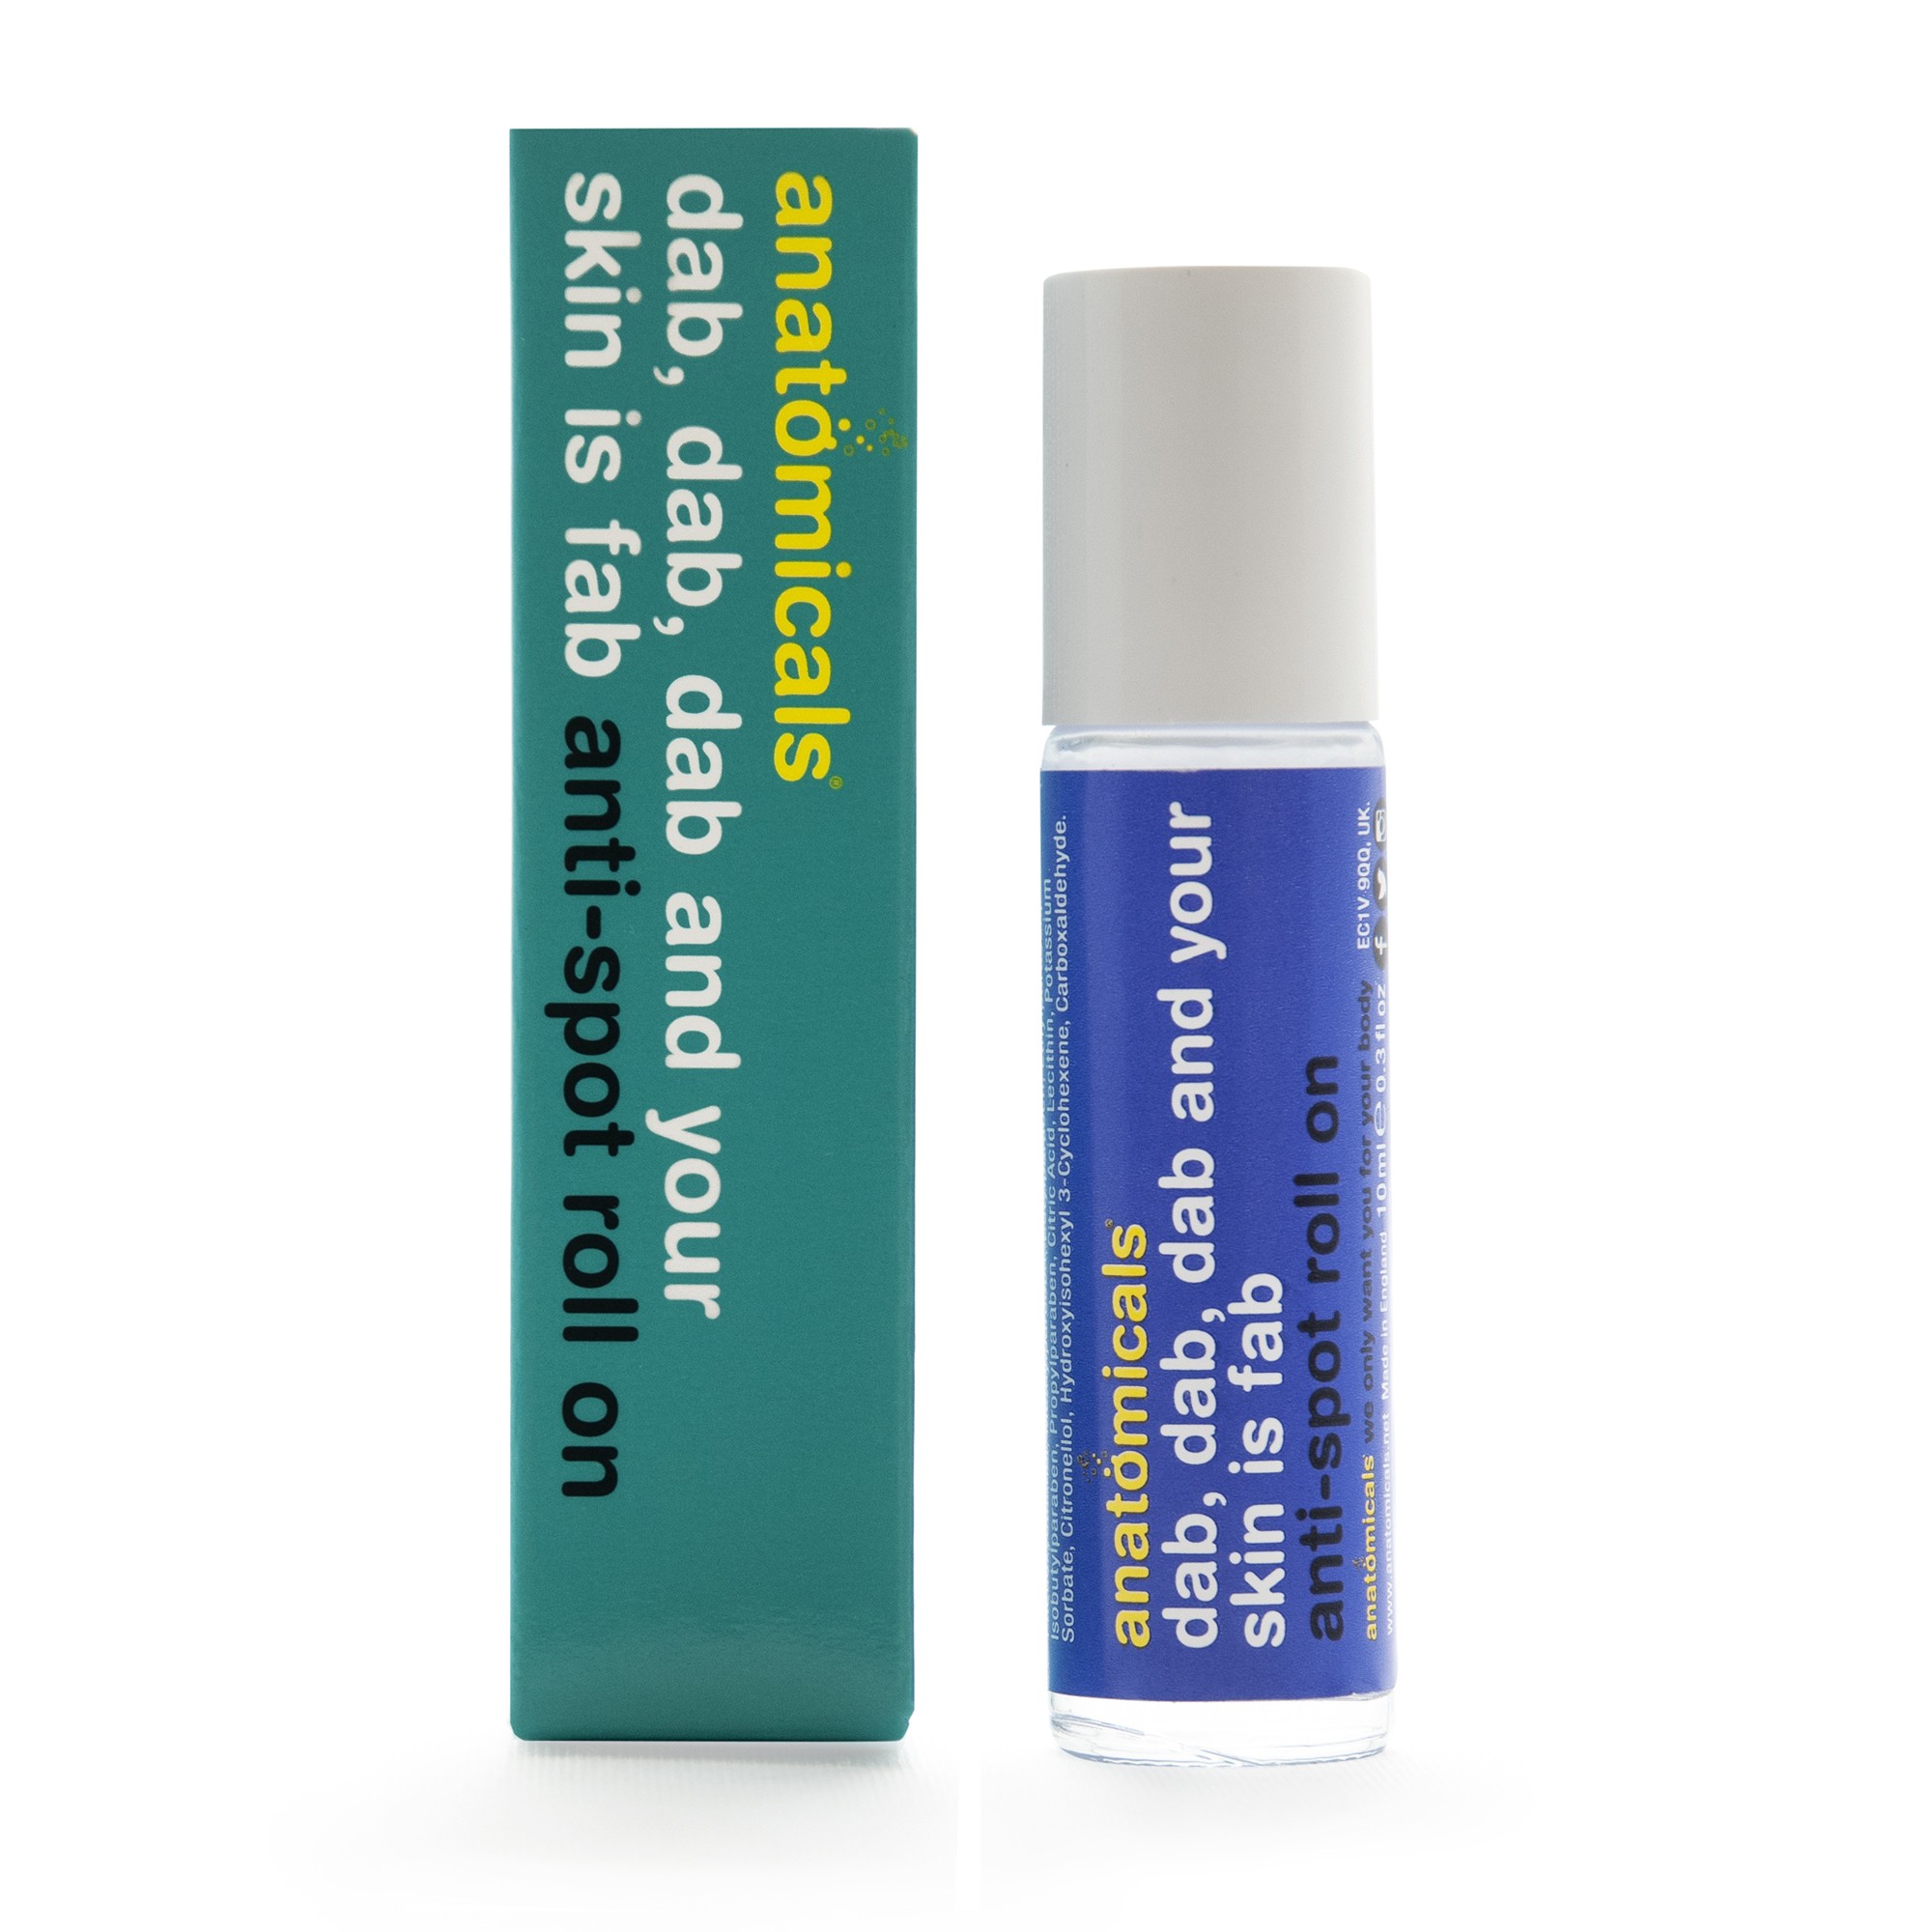 Stylo Anti Bouton - Dab, Dab, Dab And Your Skin Is Fab - Anti-Spot Roll On